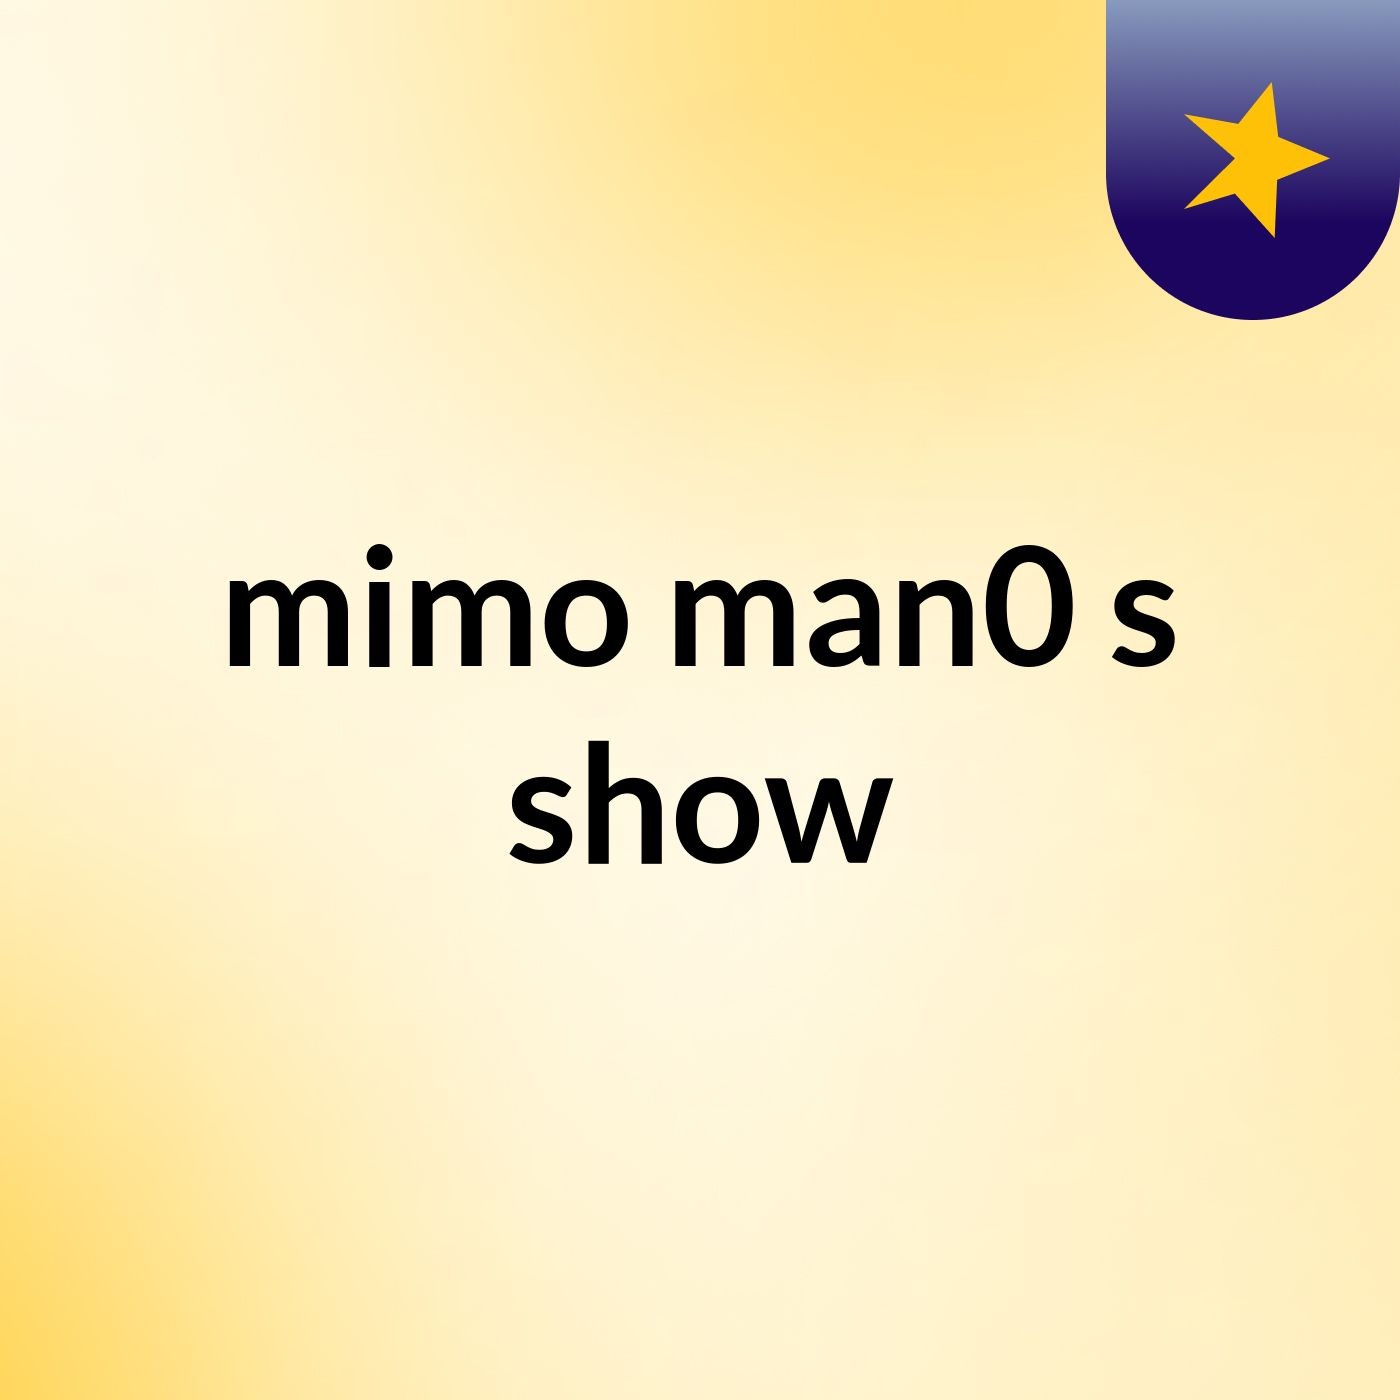 mimo man0's show